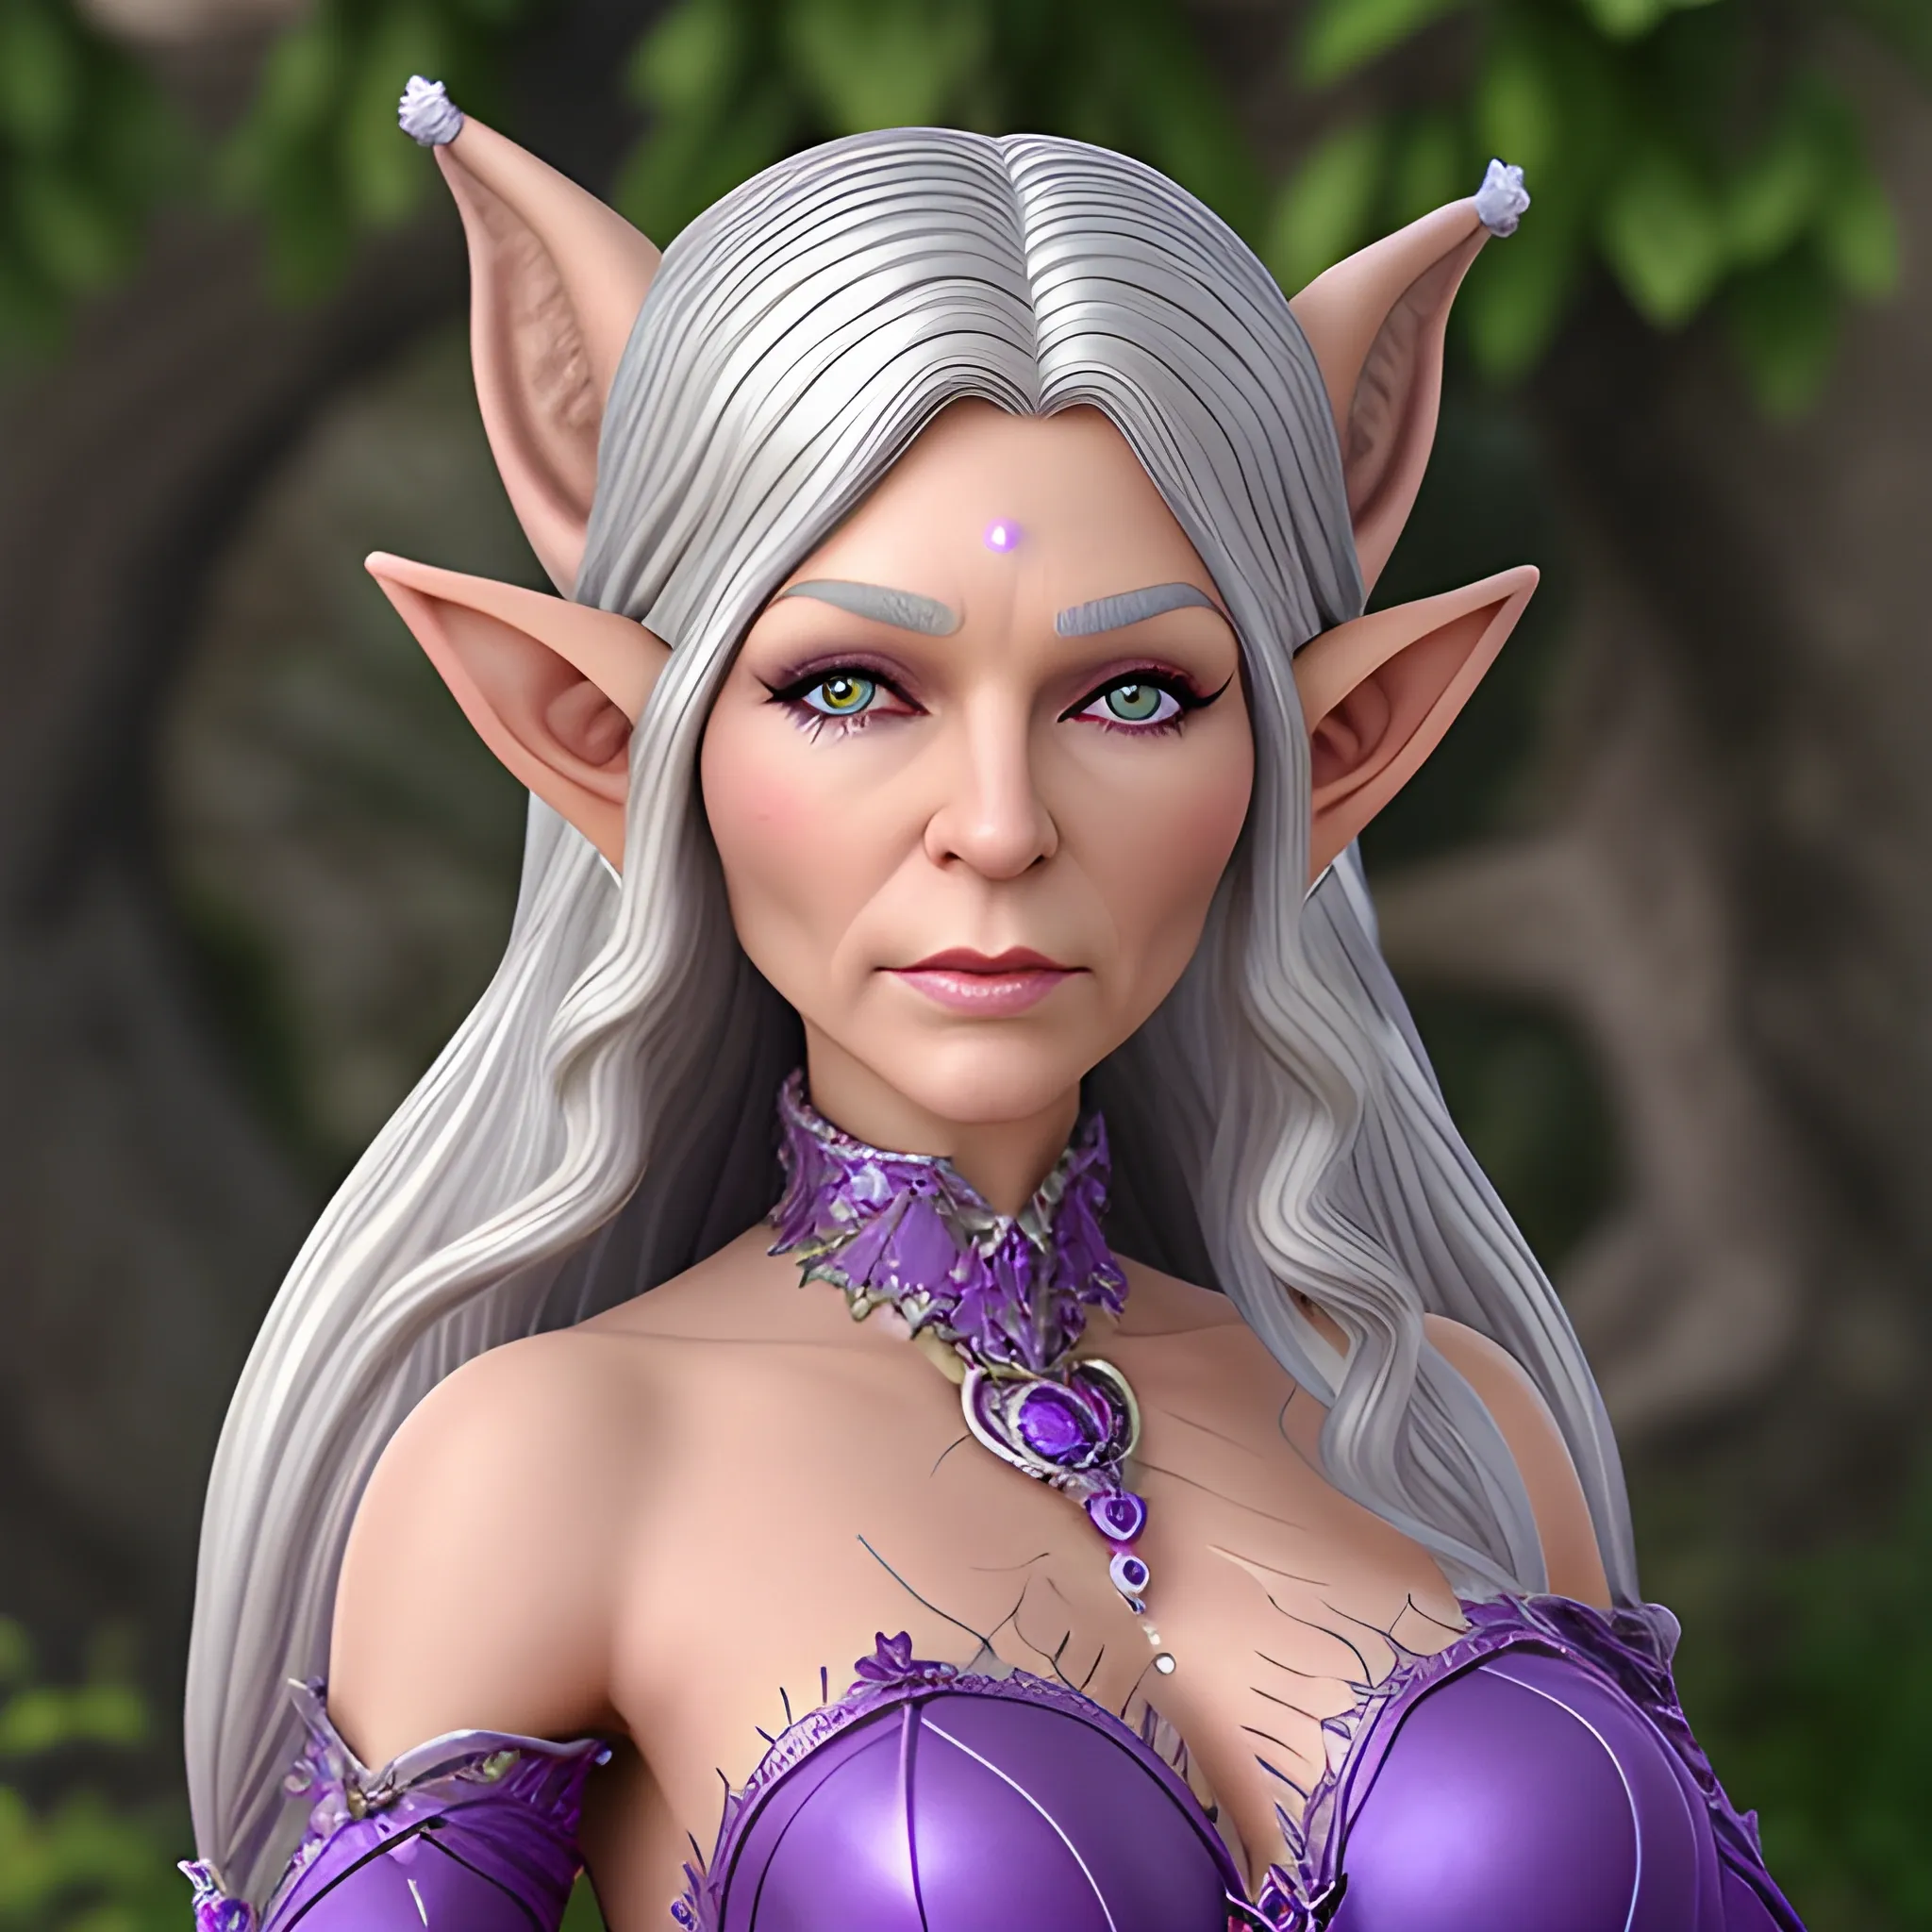 realistic older female elf with long curling silver hair and purple eyes. Jeweled ears and body. Dewy skin, soft features queenly